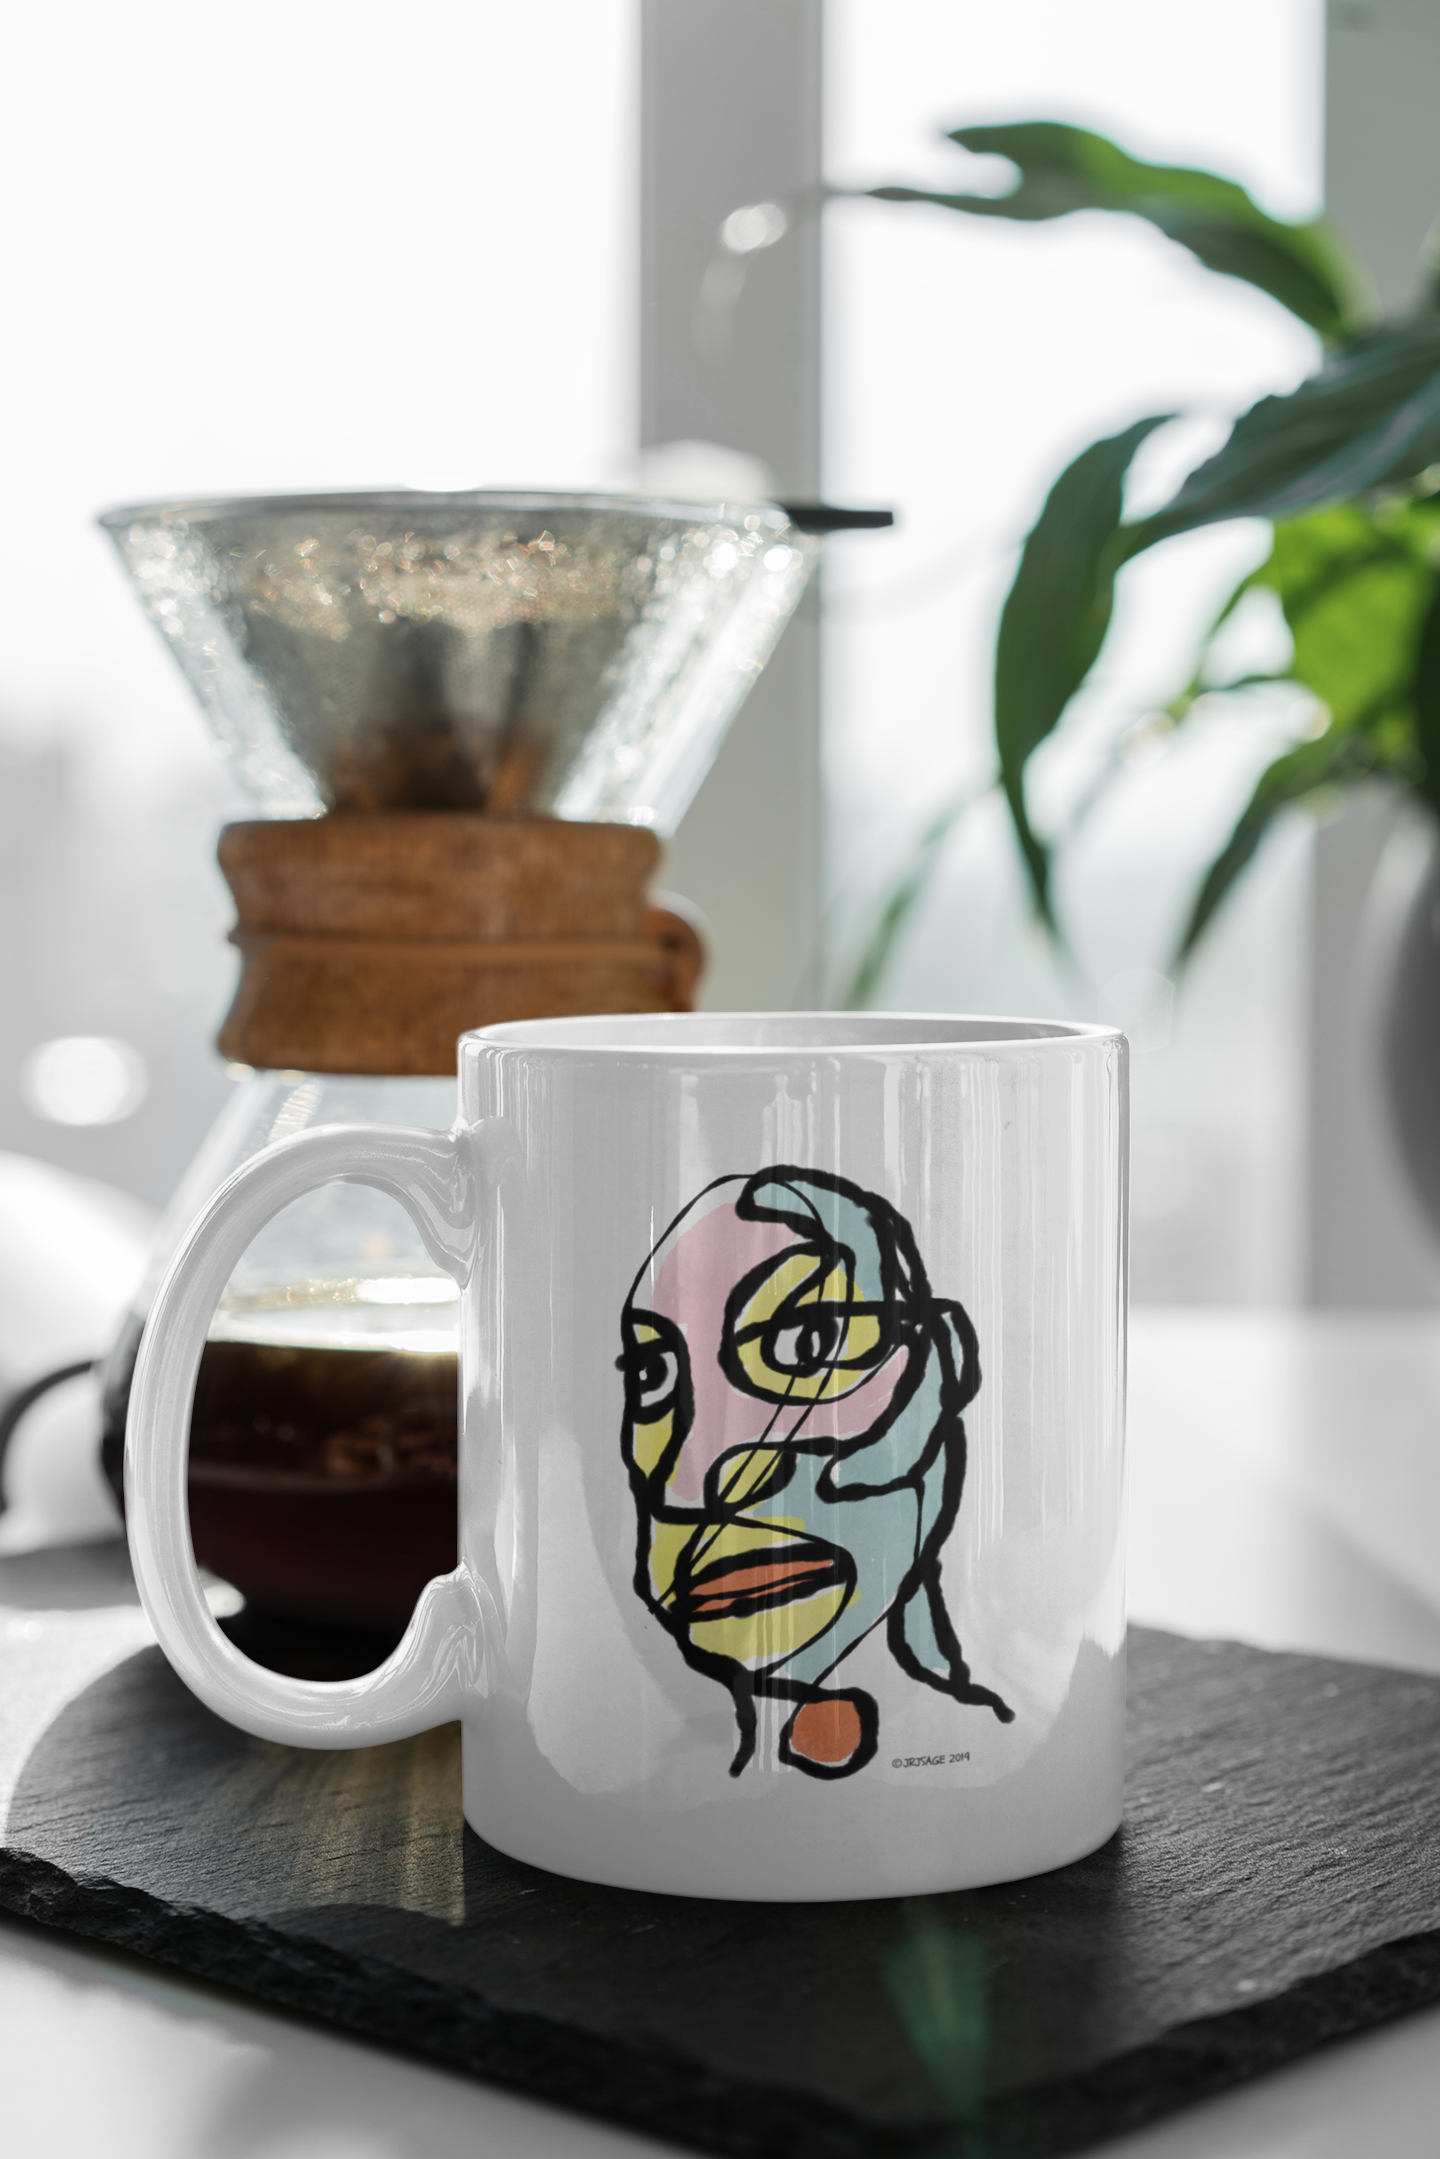 A White Ceramic Hector and Bone Mug with a quirky illustration of an arty abstract portrait